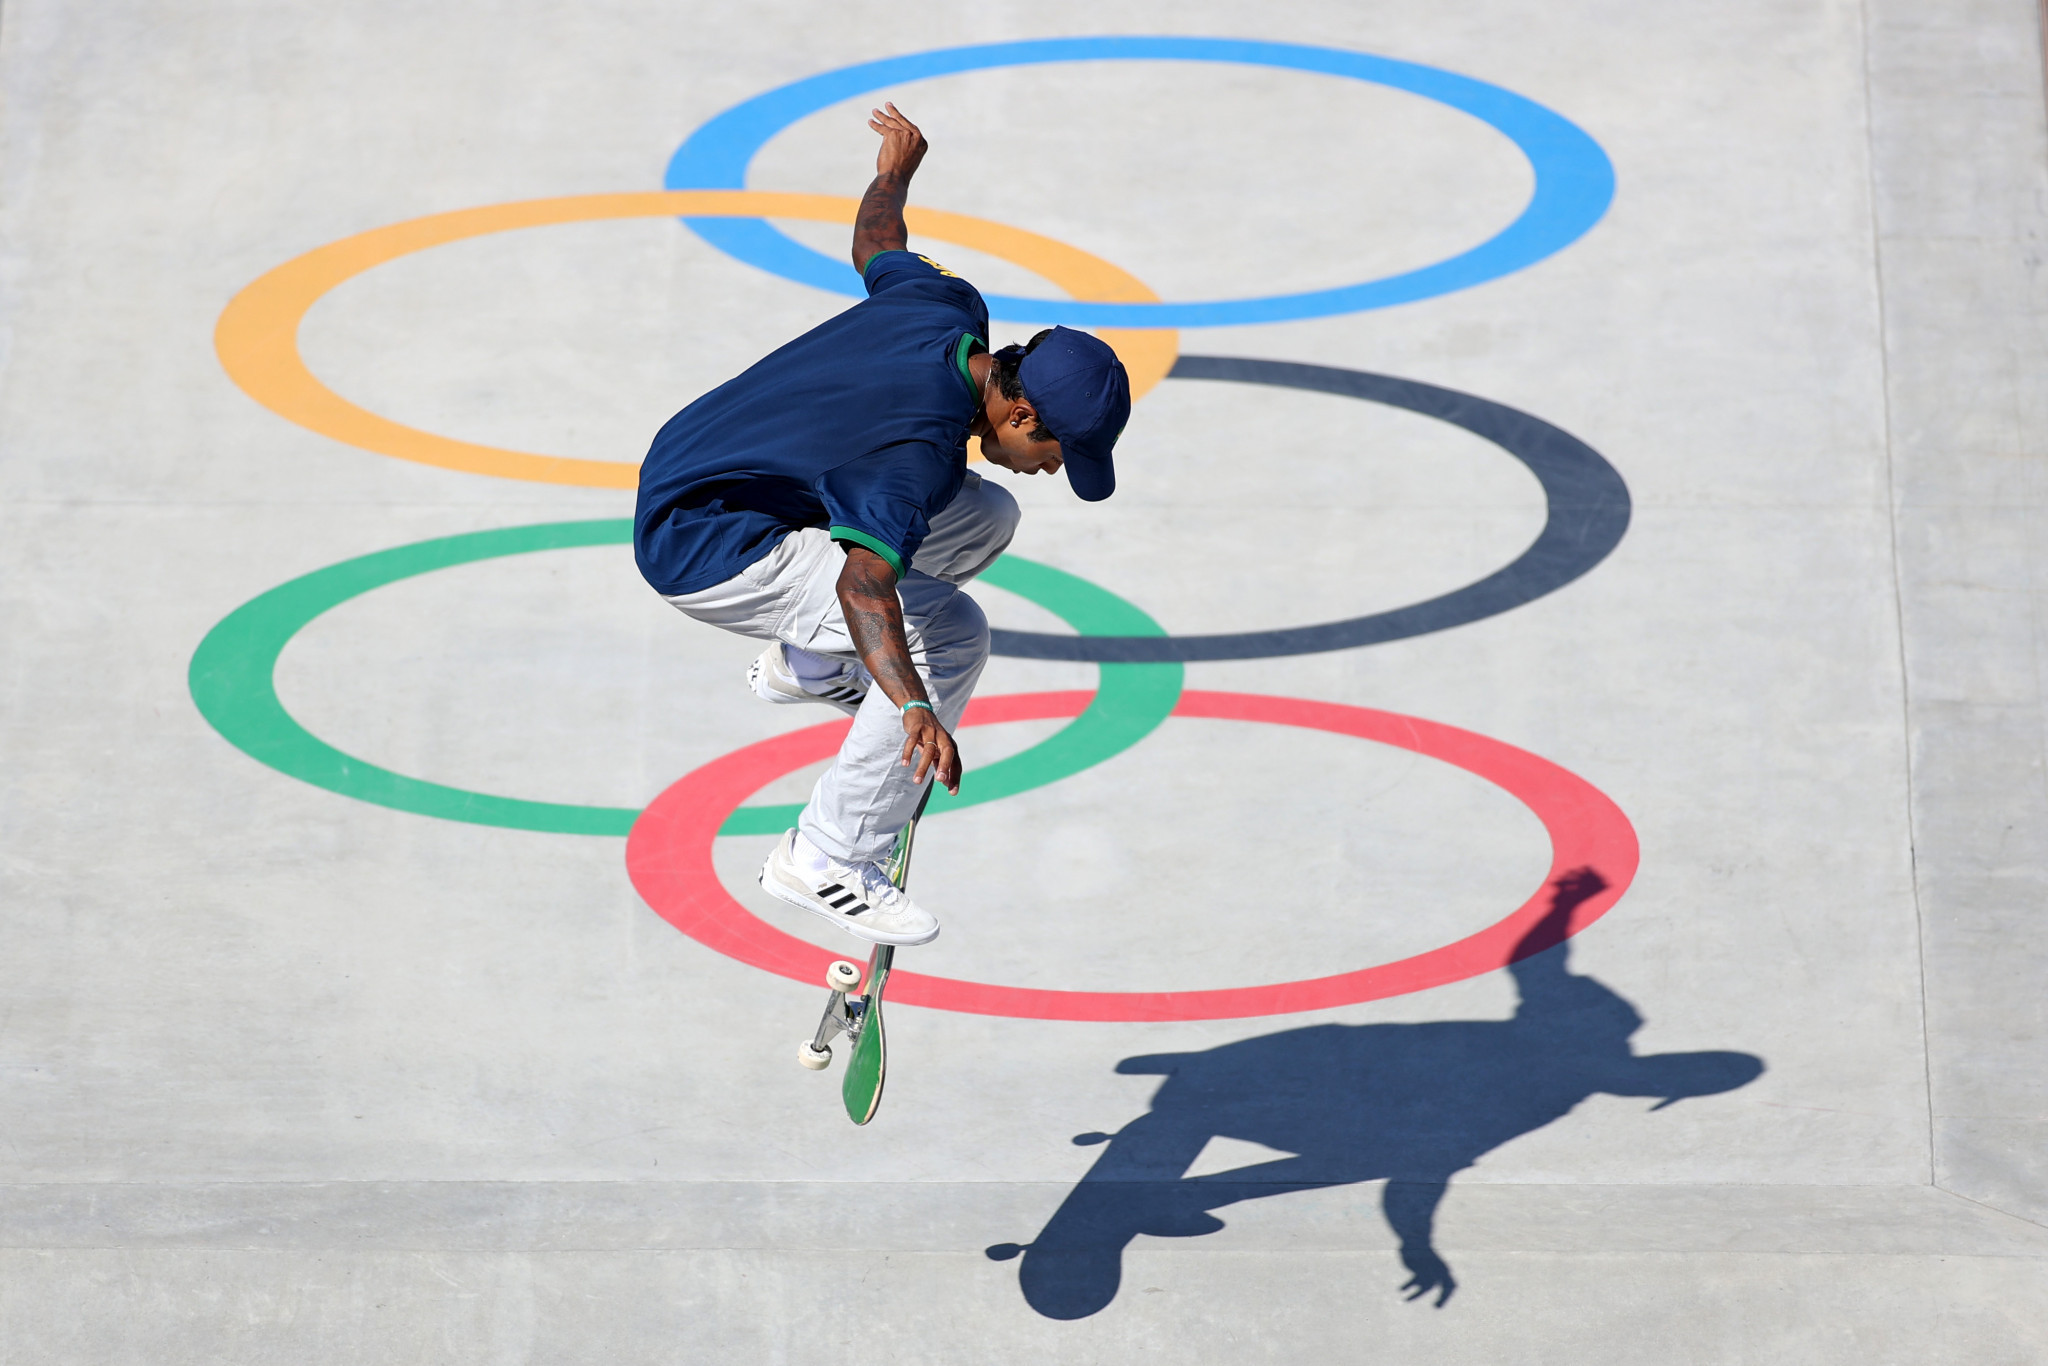 As Olympic organisers look at attract a younger, more online audience, new sports such as skateboarding proved a hit ©Getty Images